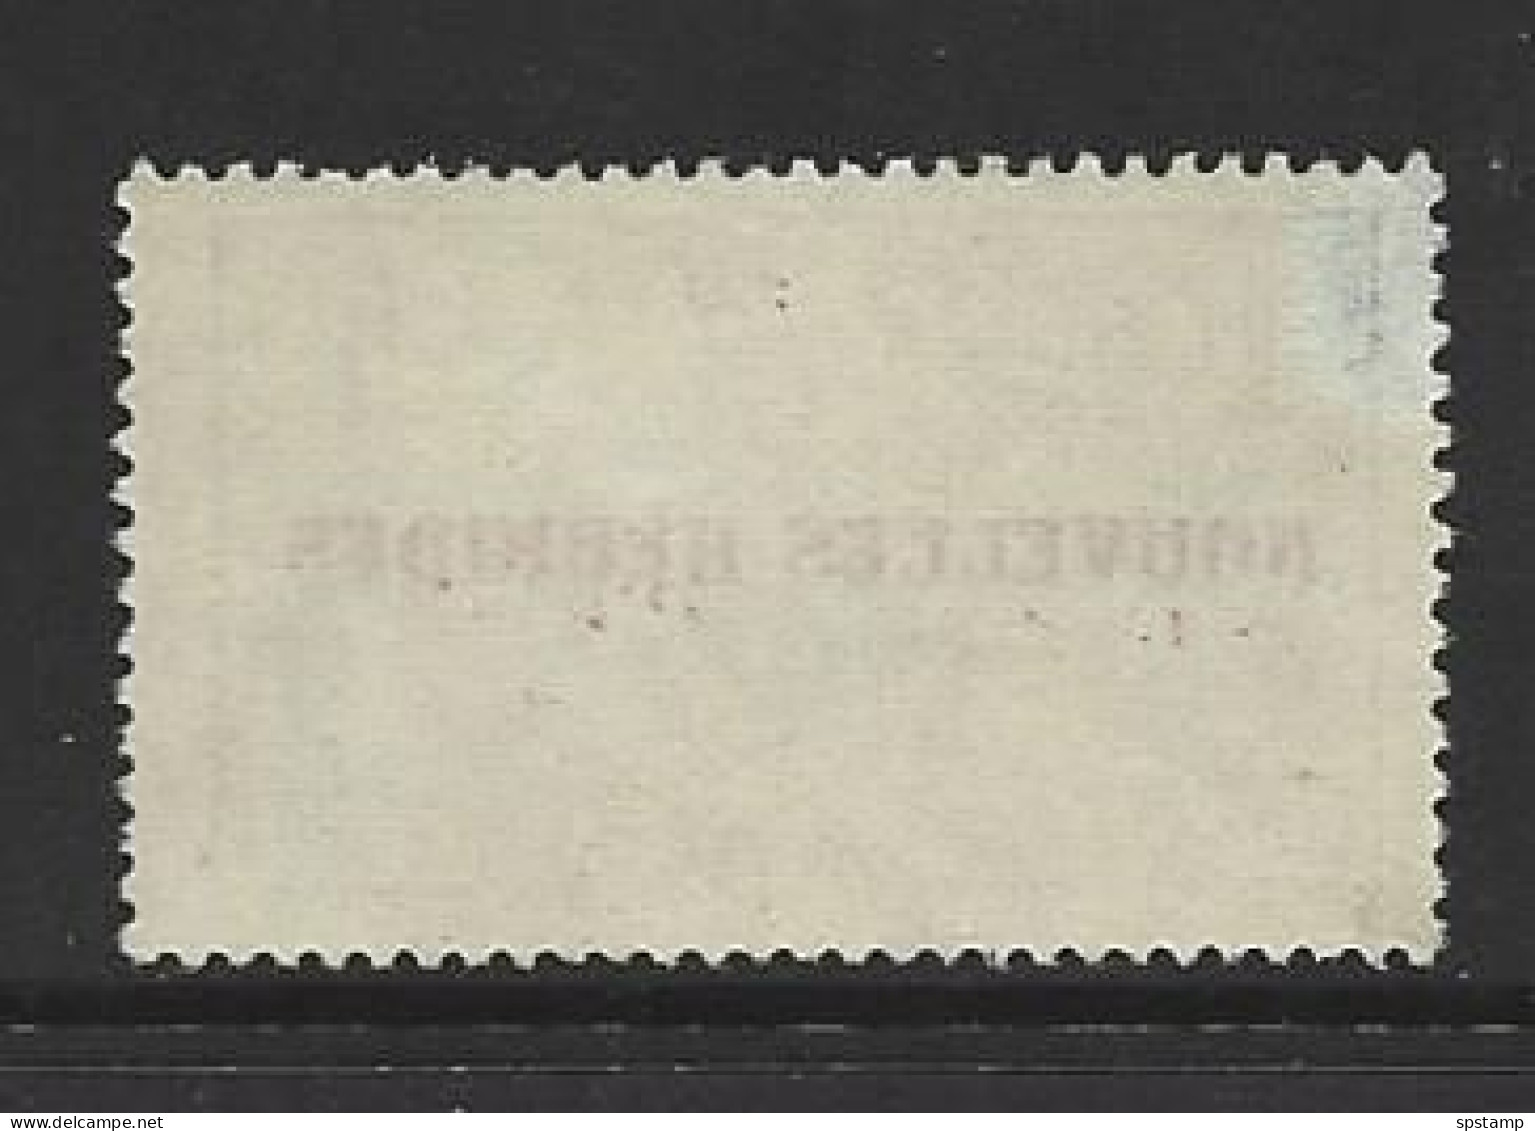 New Hebrides French 1908 Overprints On New Caledonia 1 Franc GU , Small Shallow Thin - Used Stamps